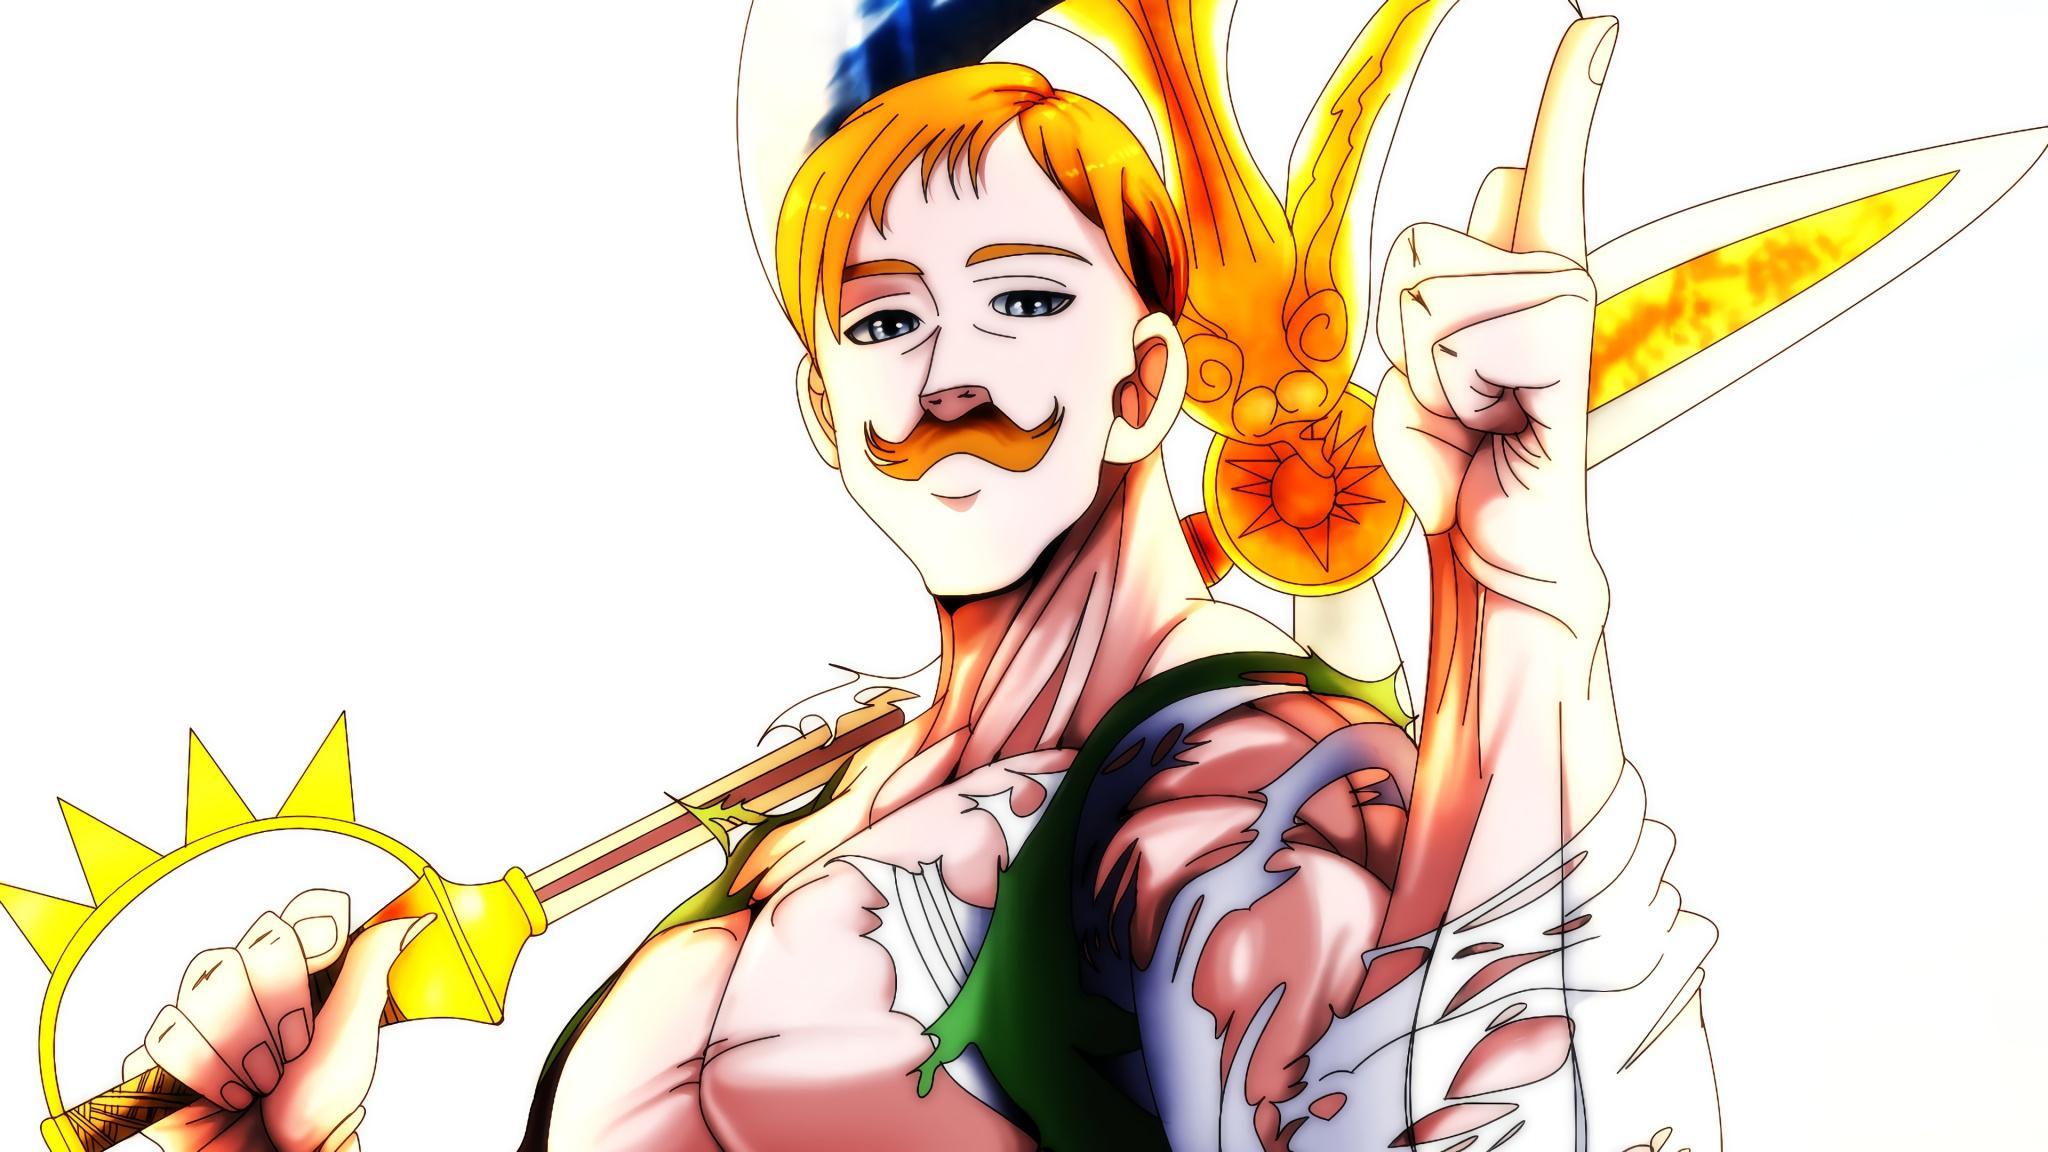 Stunning Escanor Wallpaper HD image For Free Download